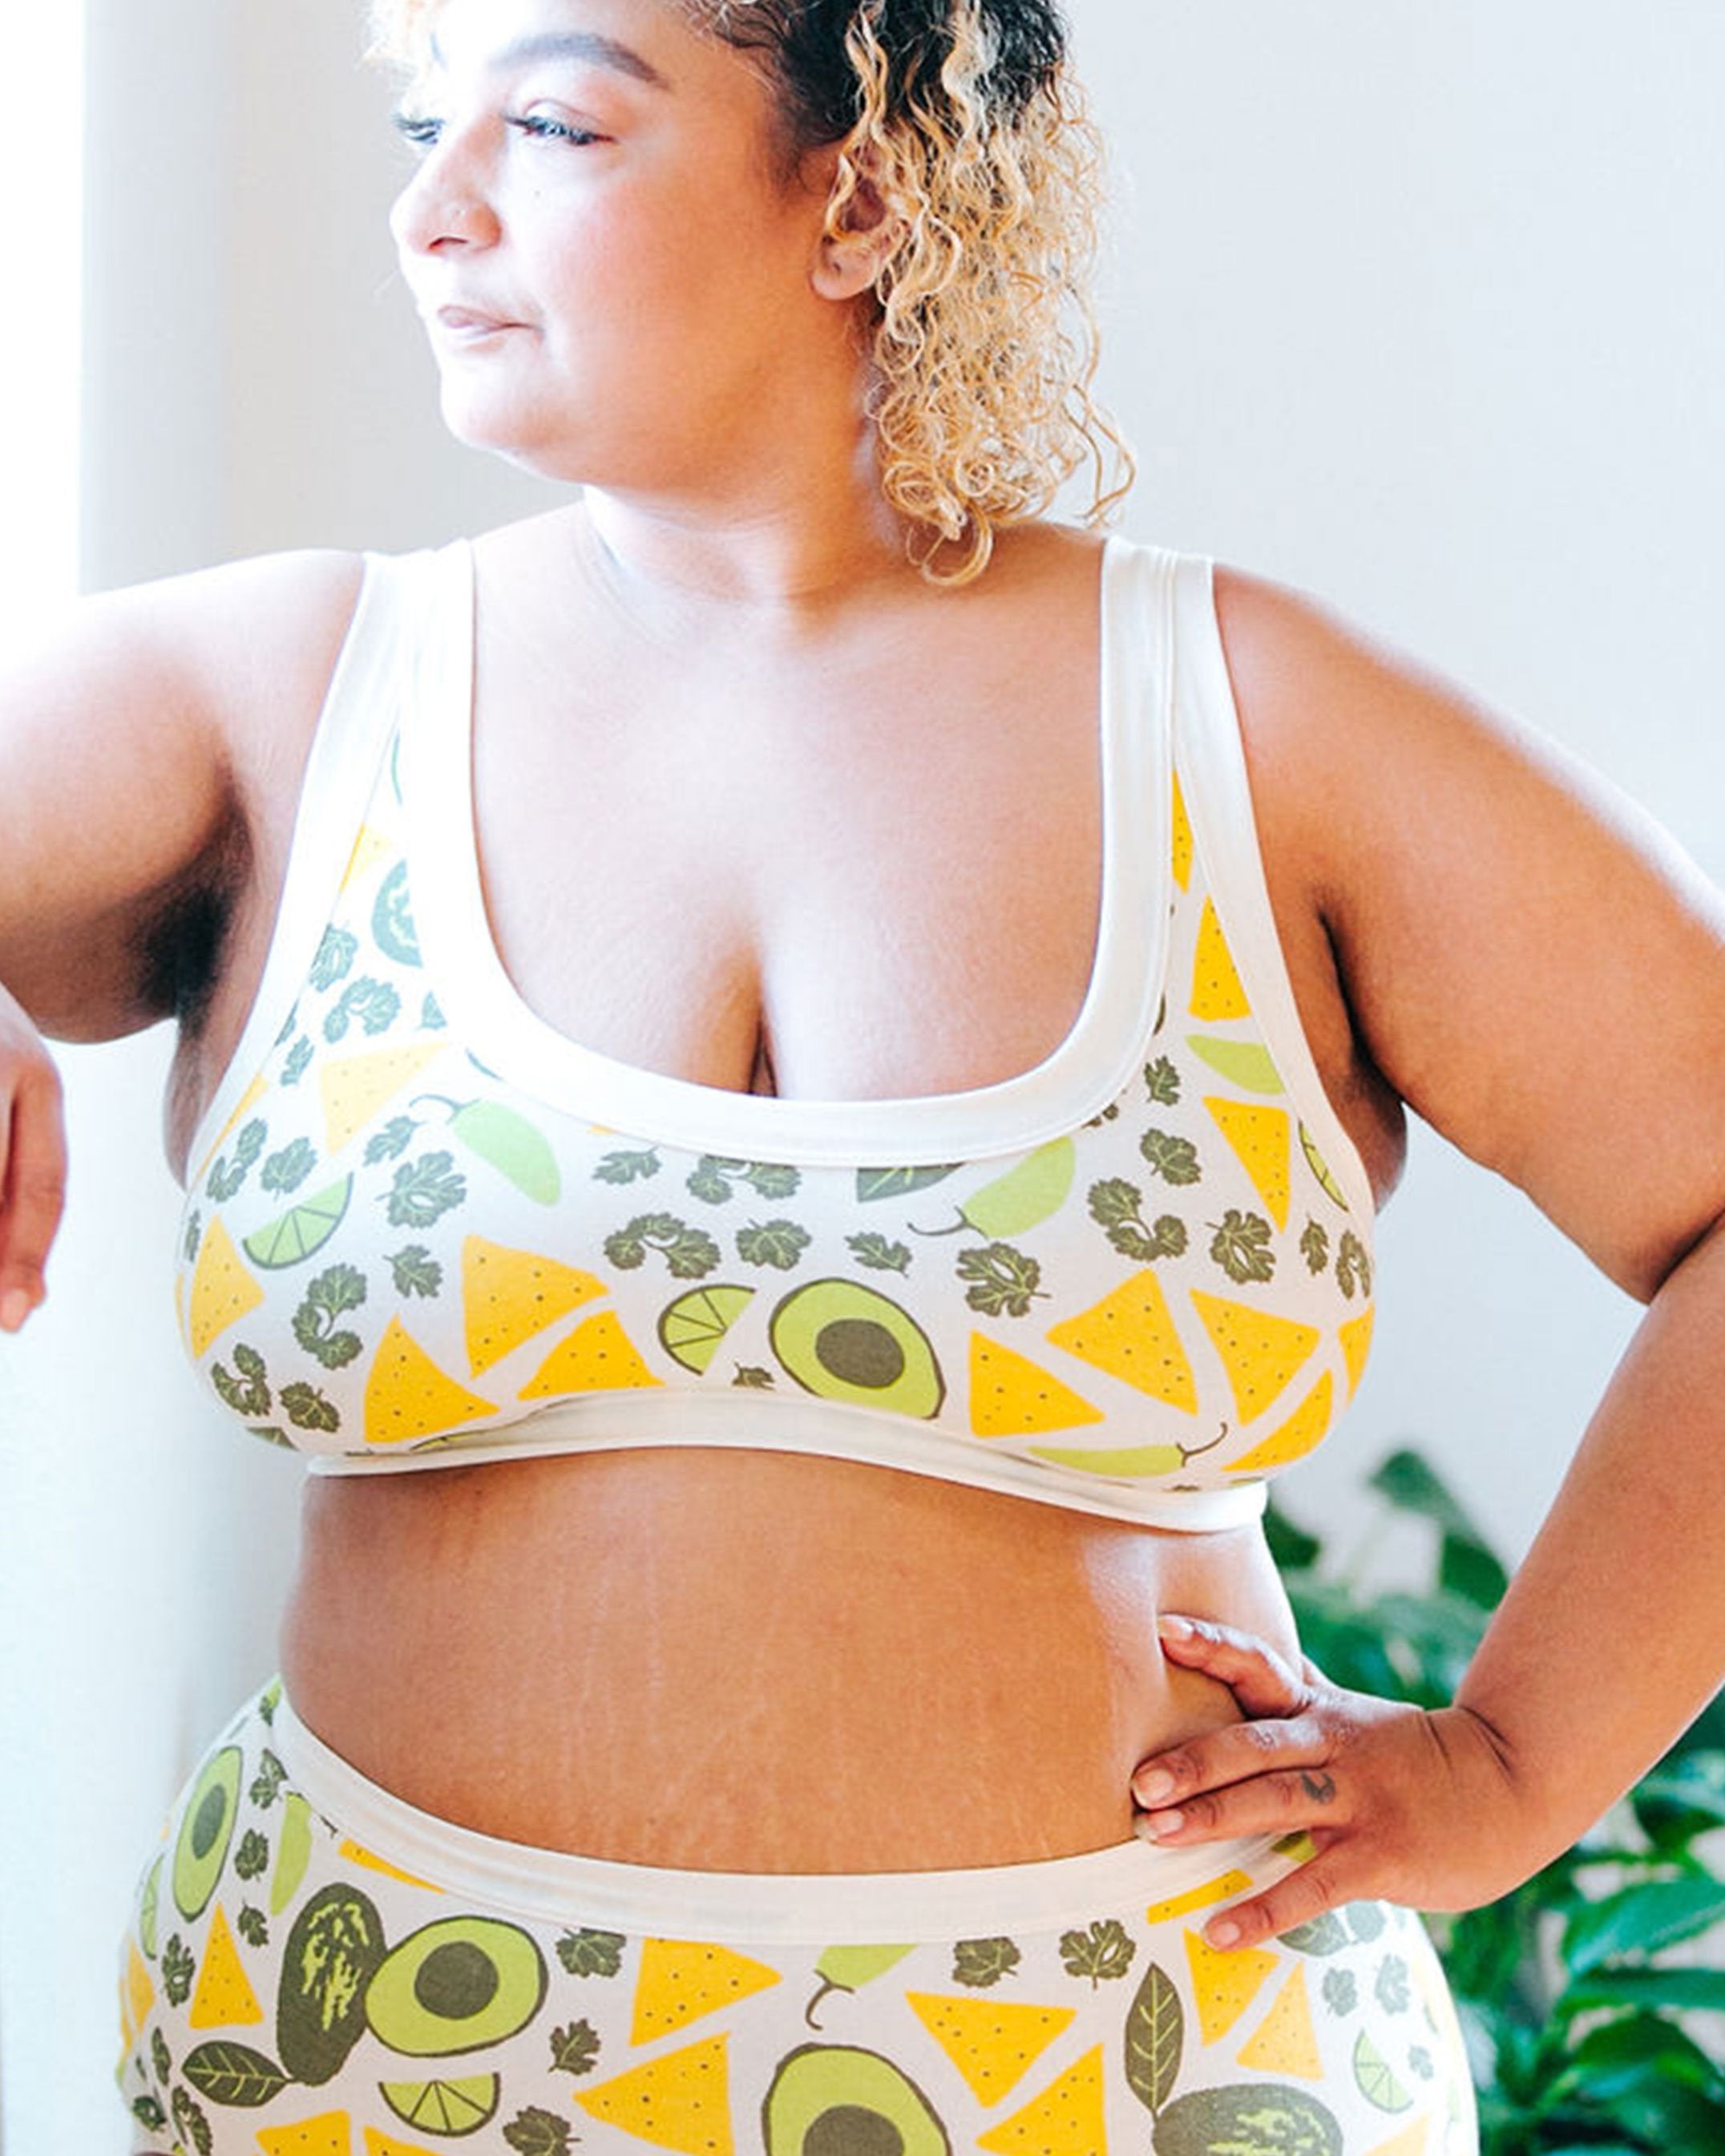 Close up of a beautiful plus-sized model wearing a Thunderpants organic cotton Bralette and Original style underwear in a deconstructed guacamole (avocado, cilantro, pepper, lime, and tortilla chip) print.